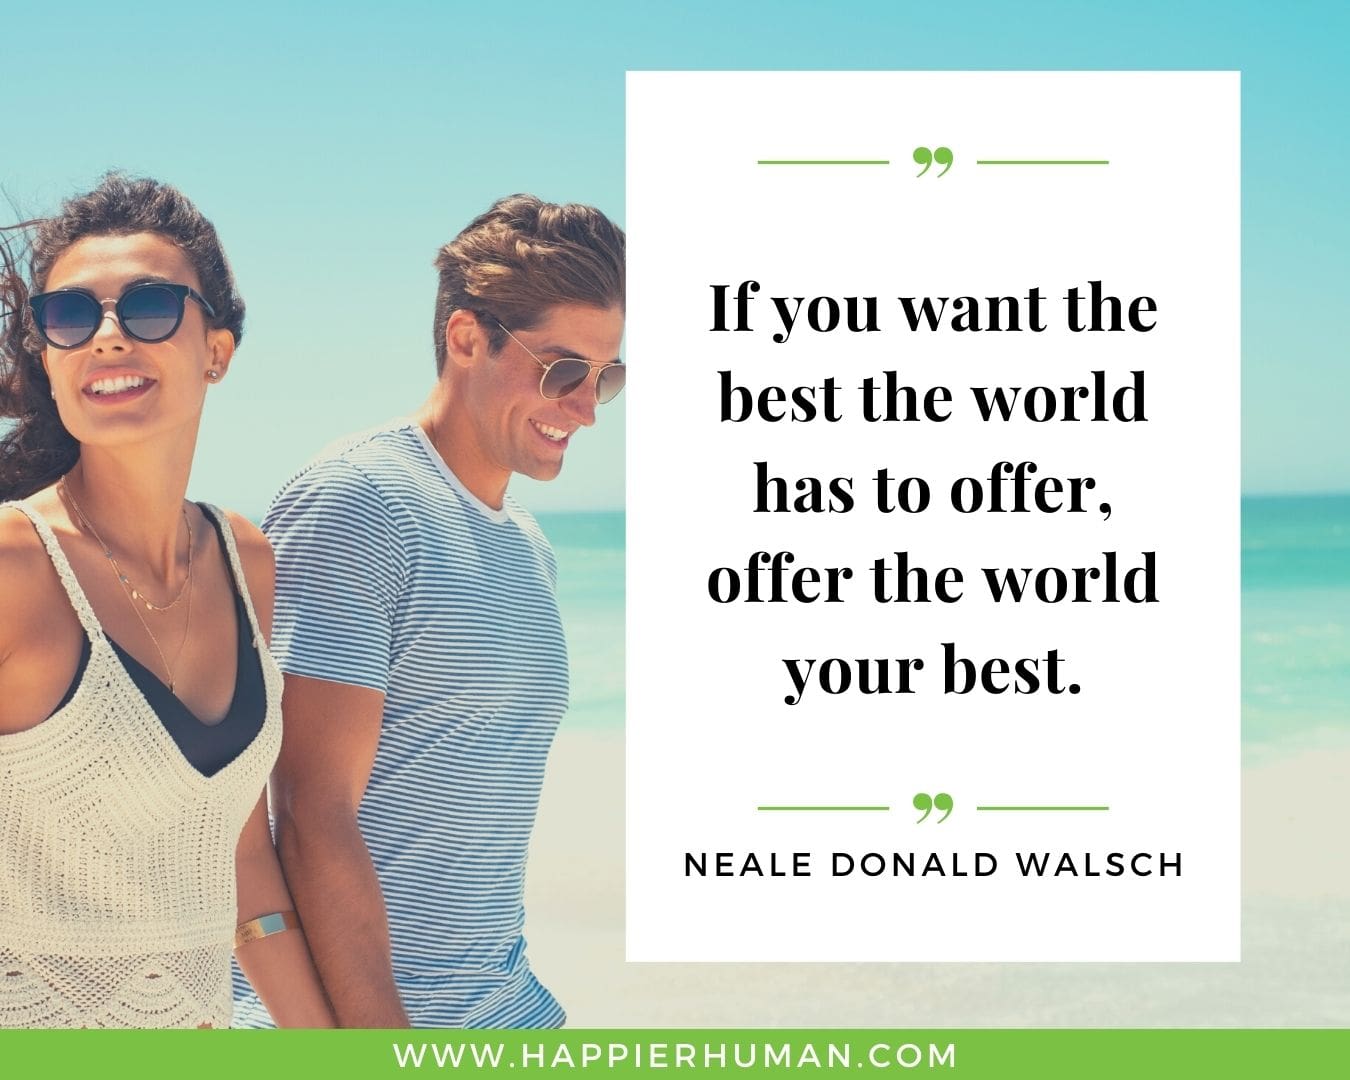 Positive Energy Quotes - “If you want the best the world has to offer, offer the world your best.” - Neale Donald Walsch